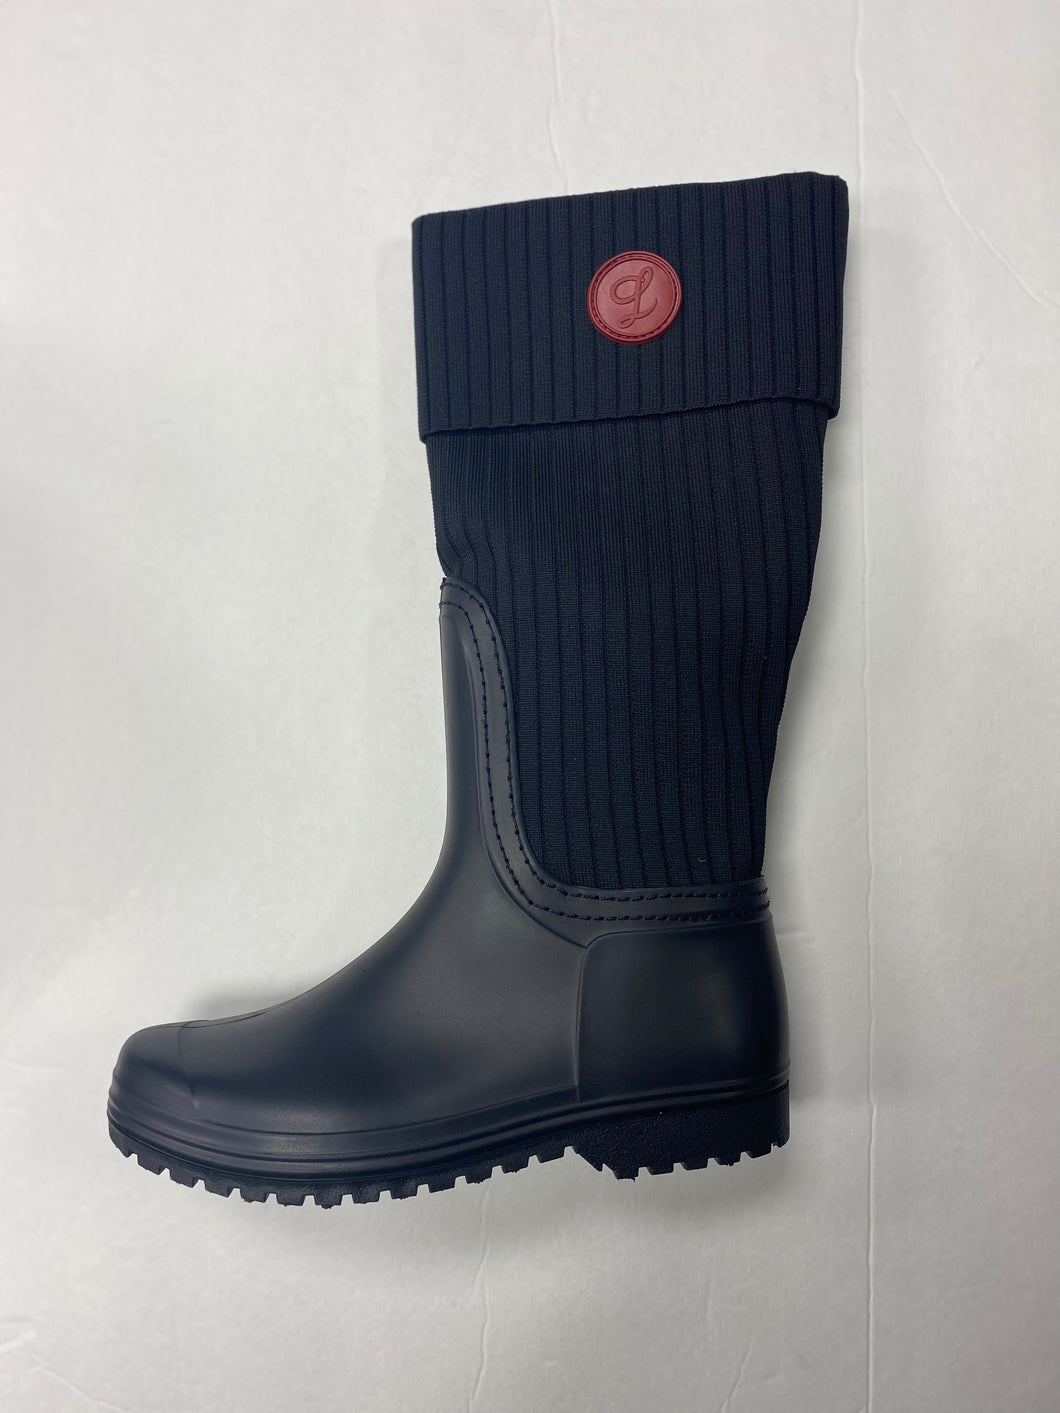 FW22 Lolit WB302 Ribbed Sock with Black Cuff Winter Boot